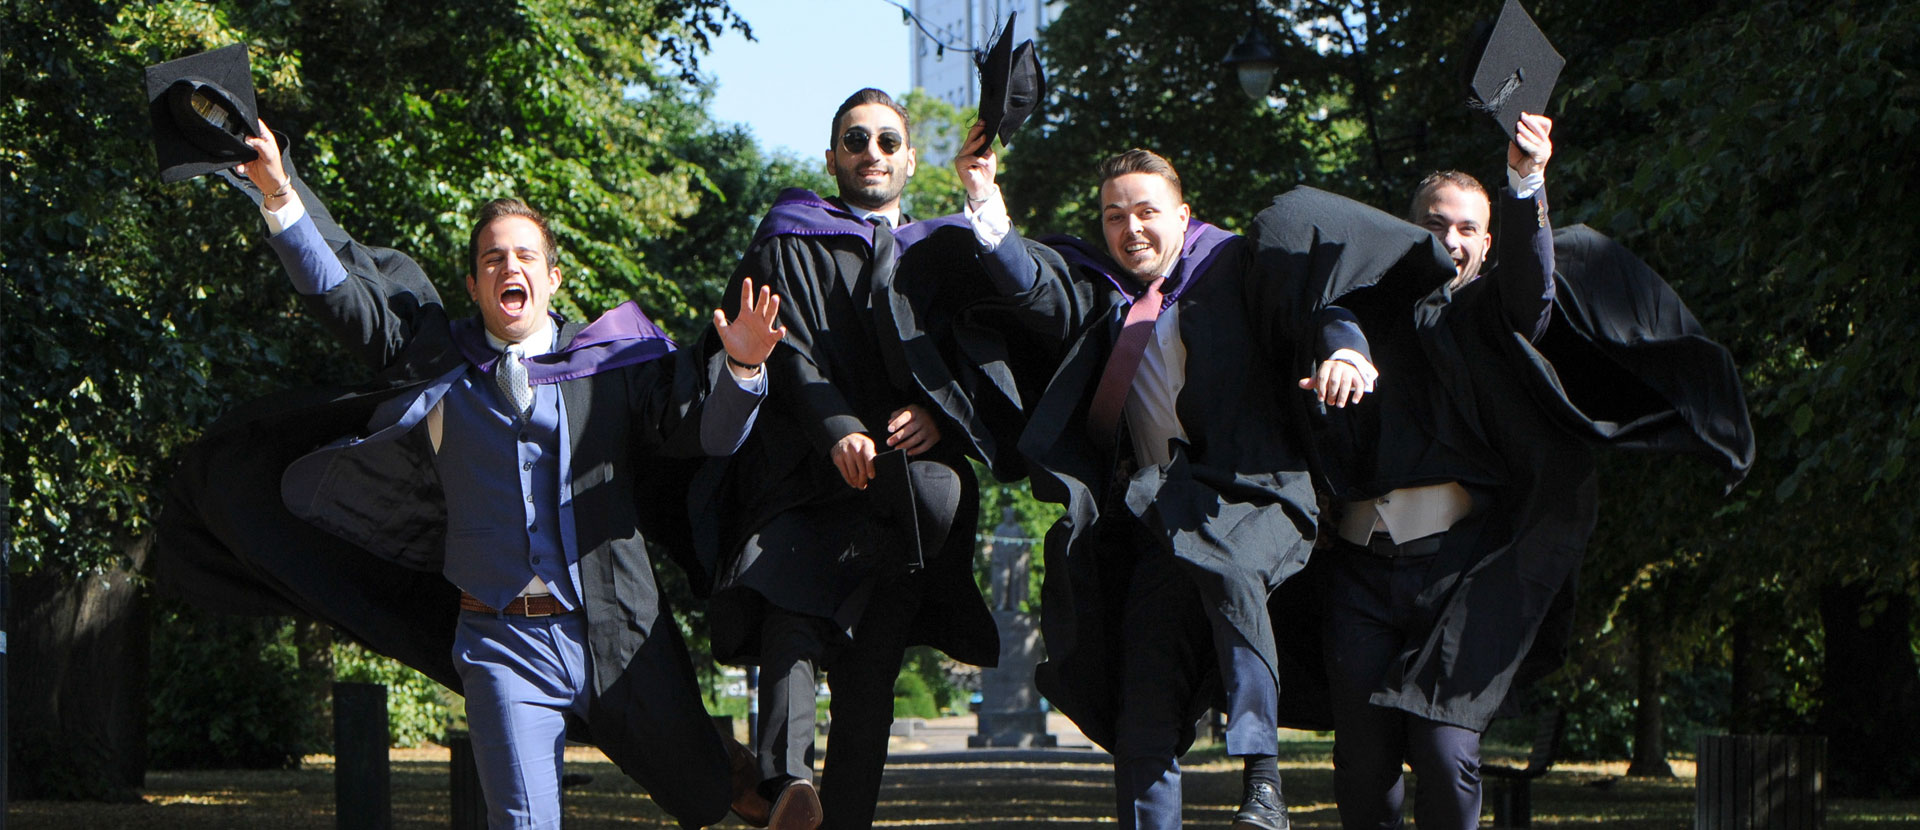 Solent graduates jumping in the air